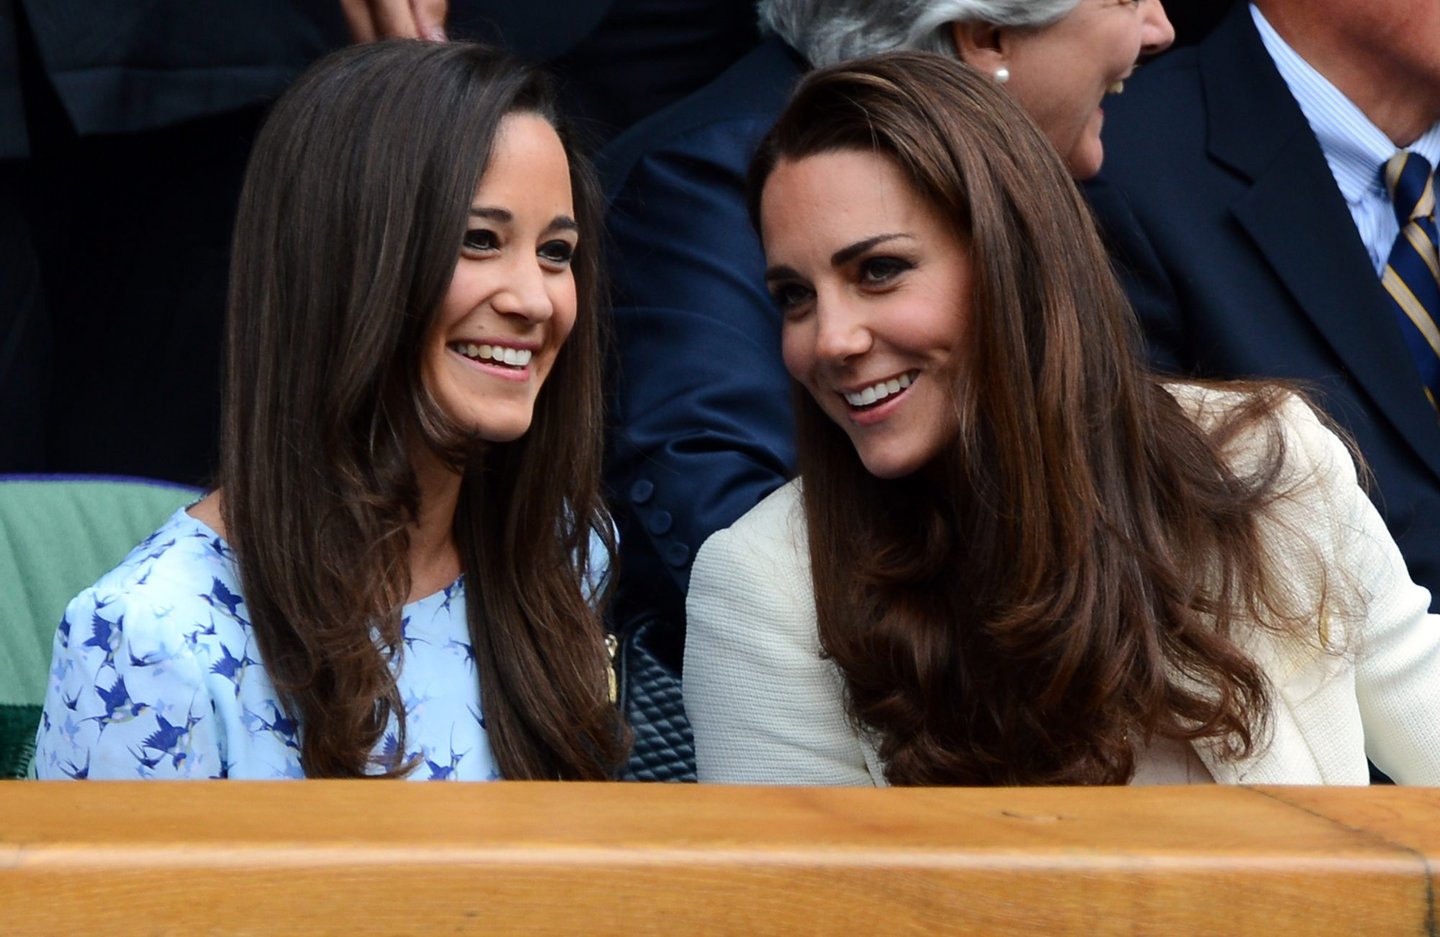 Catherine, Duchess of Cambridge (R) and her sister Pippa Middleton talk in the Royal Box before the men's singles final match between Britain's Andy Murray and Switzerland's Roger Federer on Centre Court on day 13 of the 2012 Wimbledon Championships tennis tournament at the All England Tennis Club in Wimbledon, southwest London, on July 8, 2012. AFP PHOTO / LEON NEAL RESTRICTED TO EDITORIAL USE (Photo credit should read LEON NEAL/AFP/GettyImages)